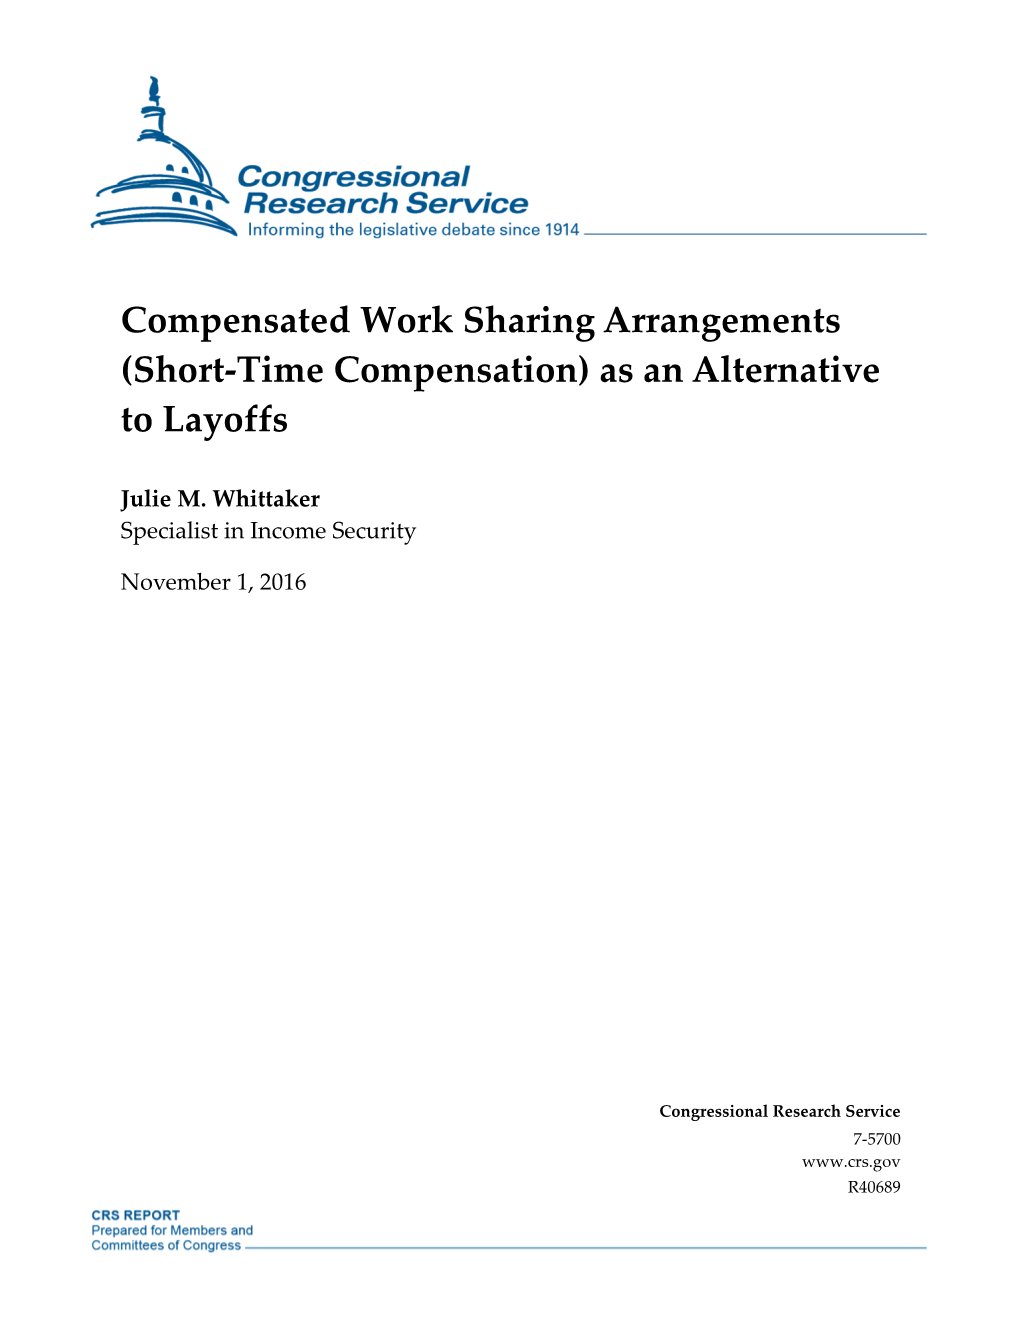 Compensated Work Sharing Arrangements (Short-Time Compensation) As an Alternative to Layoffs